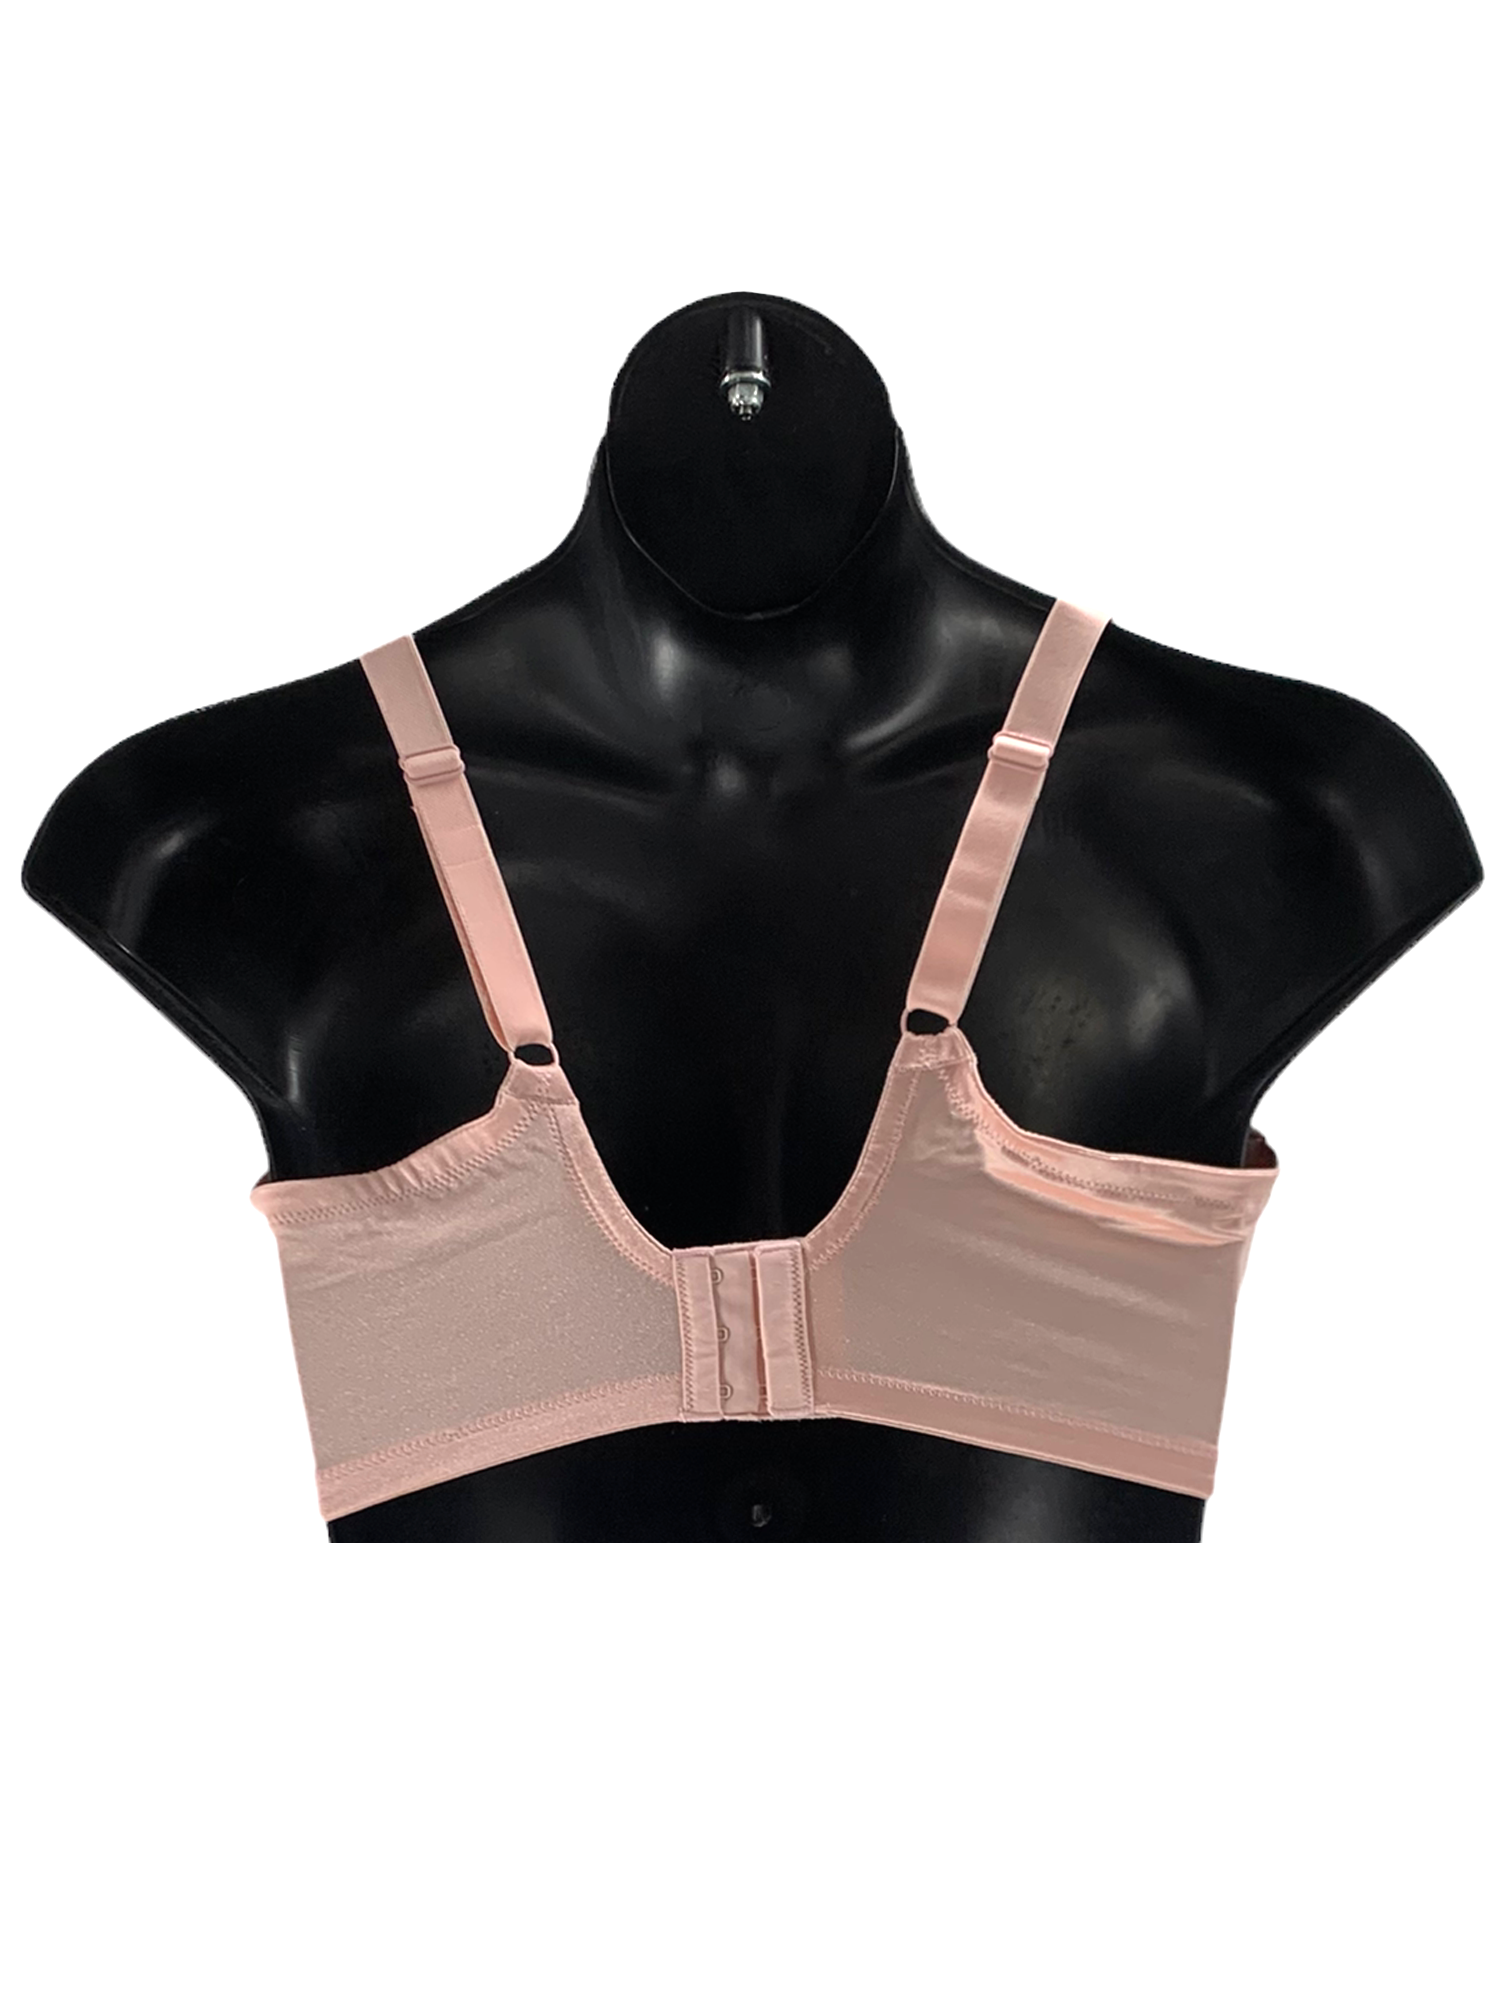 Breezies Body Luxe Minimizer Bra with Lace Detail Pale Blush